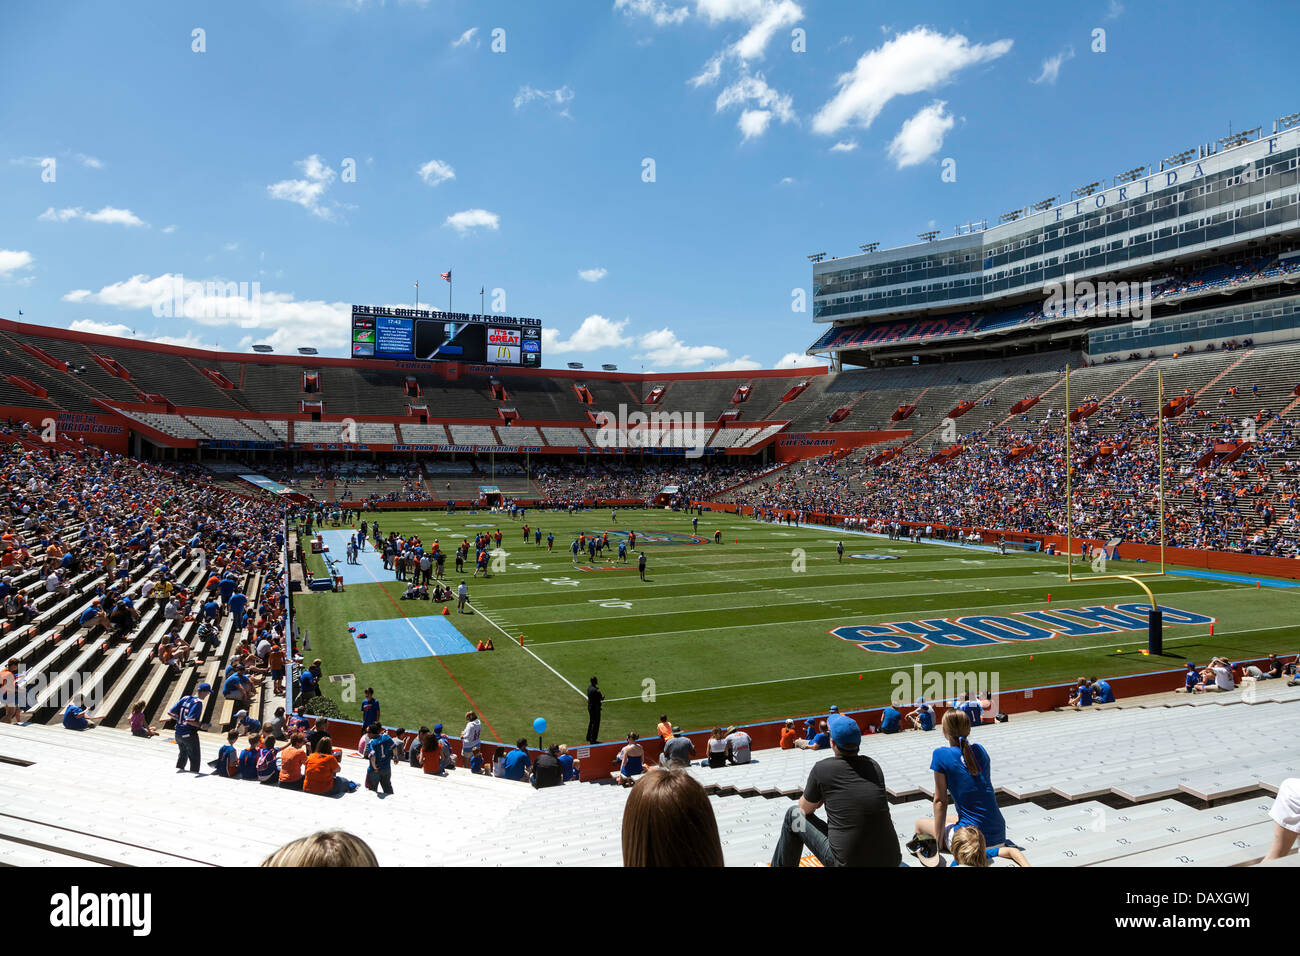 UF Gators 2013 Annual Spring Orange and Blue football game in the Ben Hill Griffin Stadium Florida Field a.k.a. the Swamp. Stock Photo